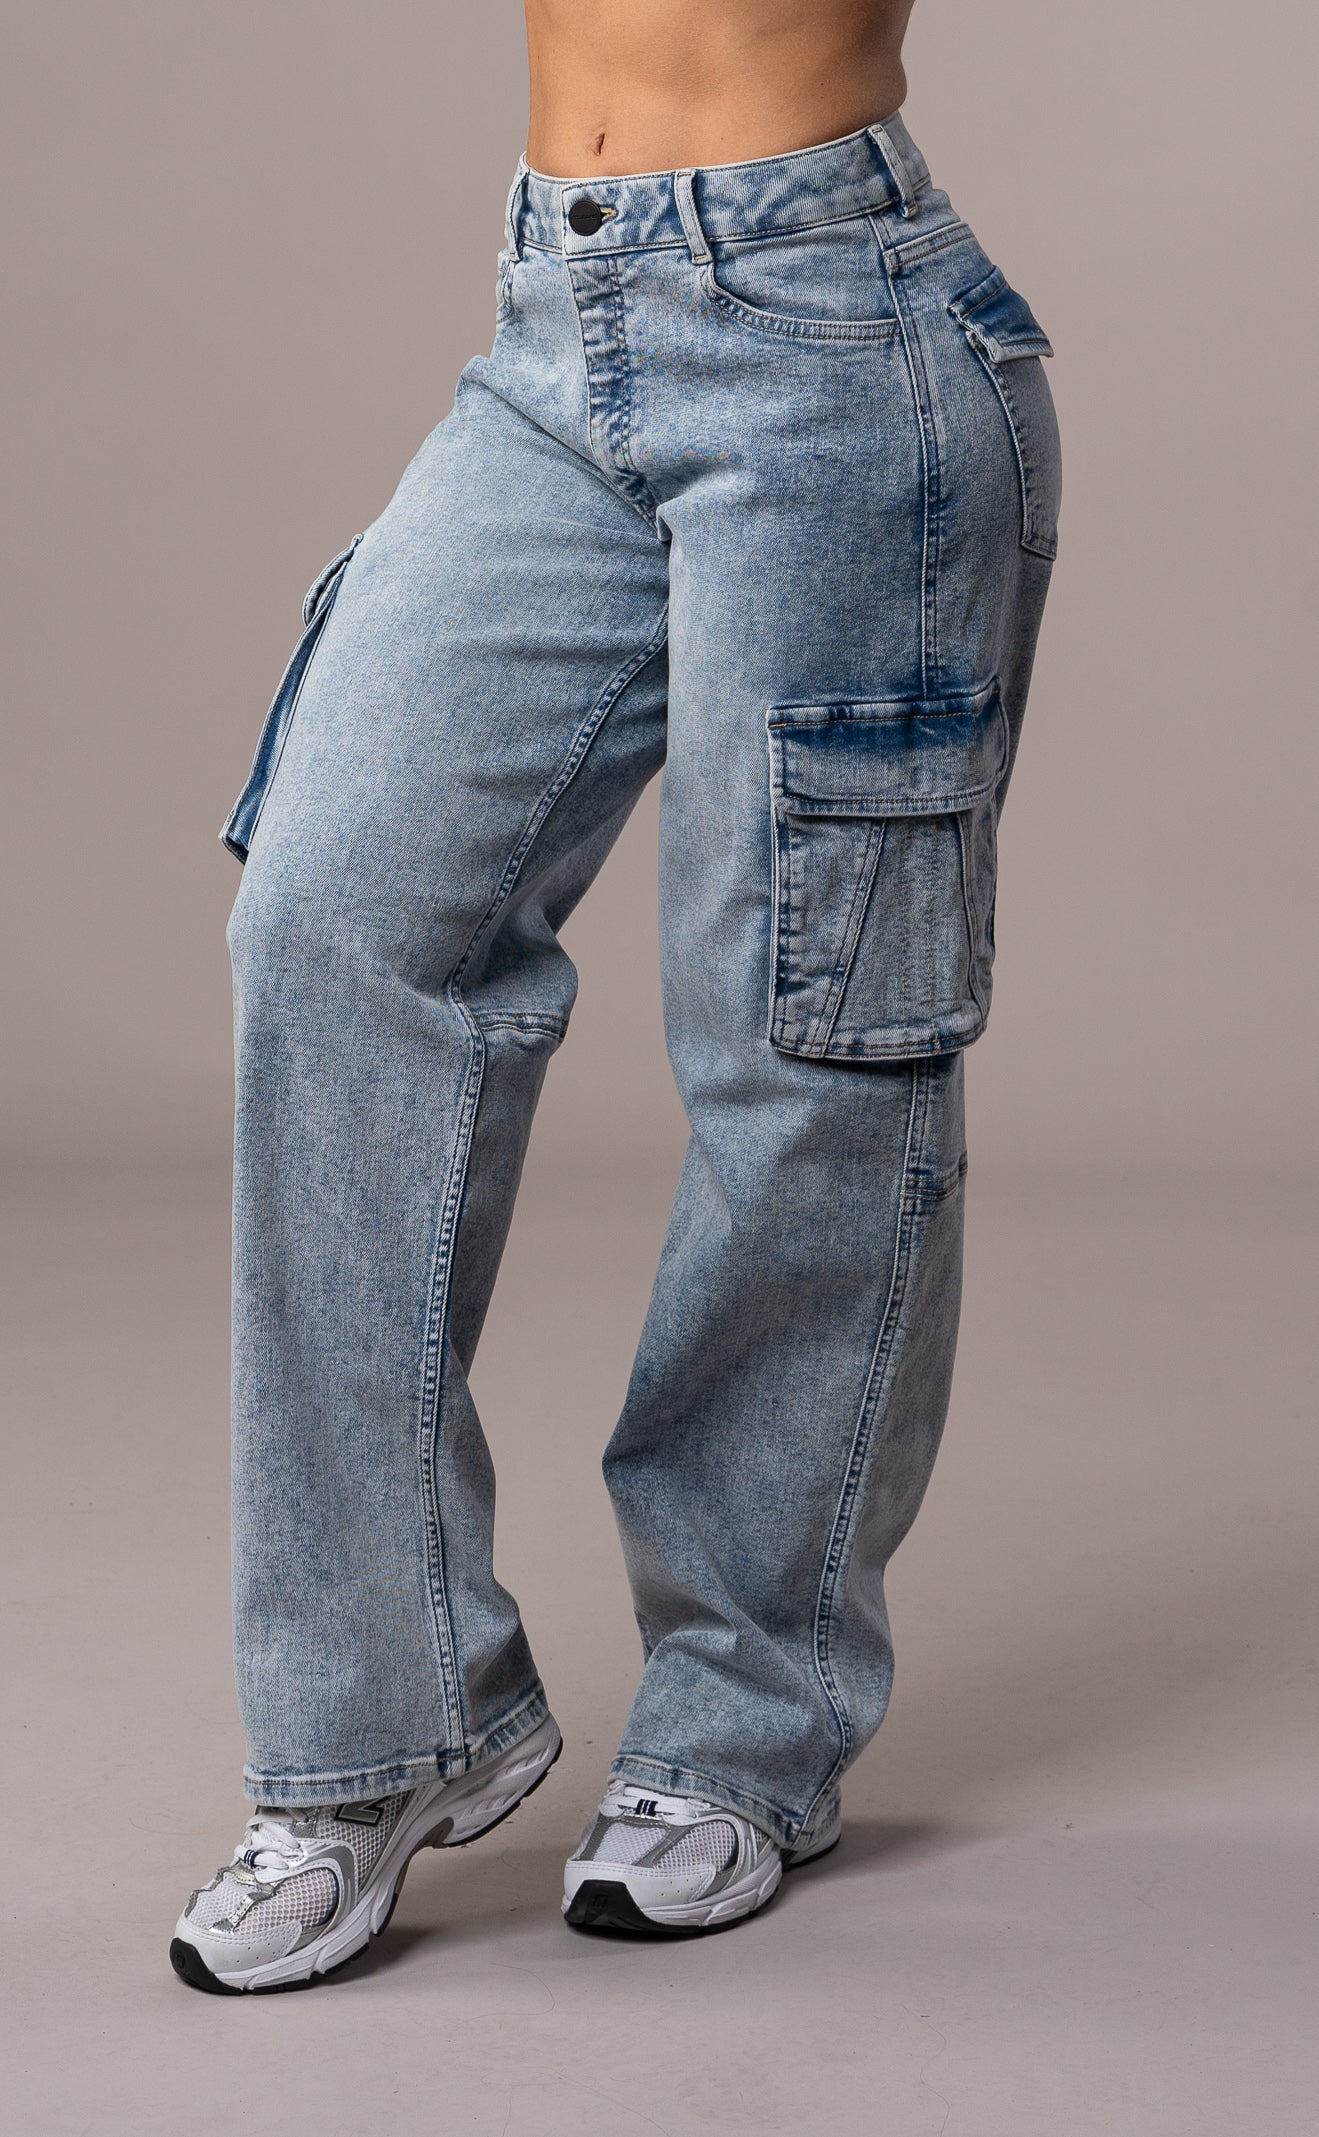 Womens Cargo Fitjeans - 80s Blue Cargo FITJEANS   